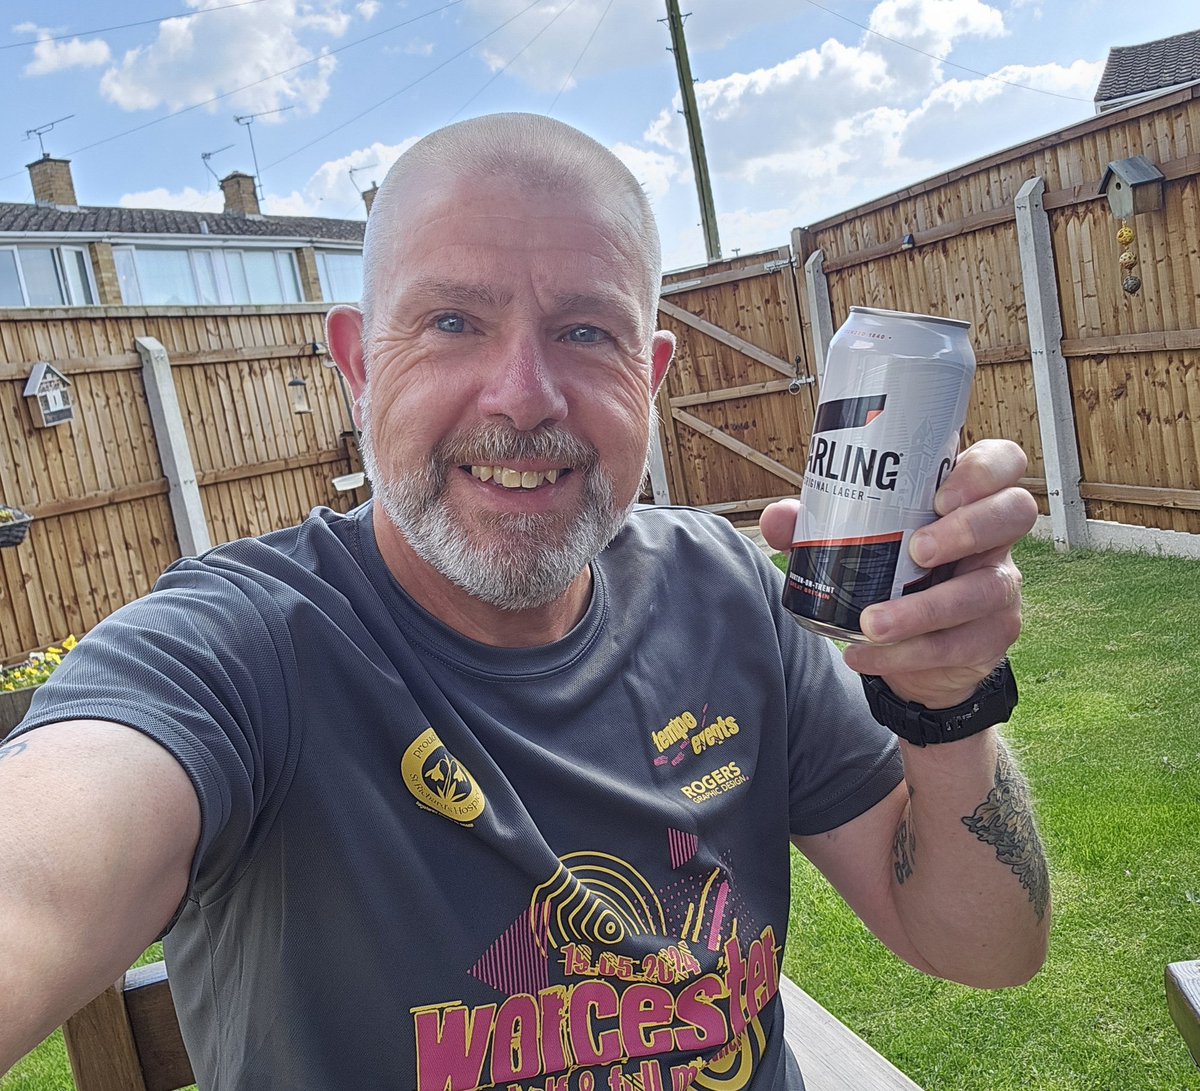 Those that know me know that running in the heat is not my most favourite of past times so you will be surprised to hear......I bloody loved that! 😍 That was indeed a worthwhile county line trip to Worcestershire to clock up marathon #94. 👊  @UKRunChat #ukrunchat